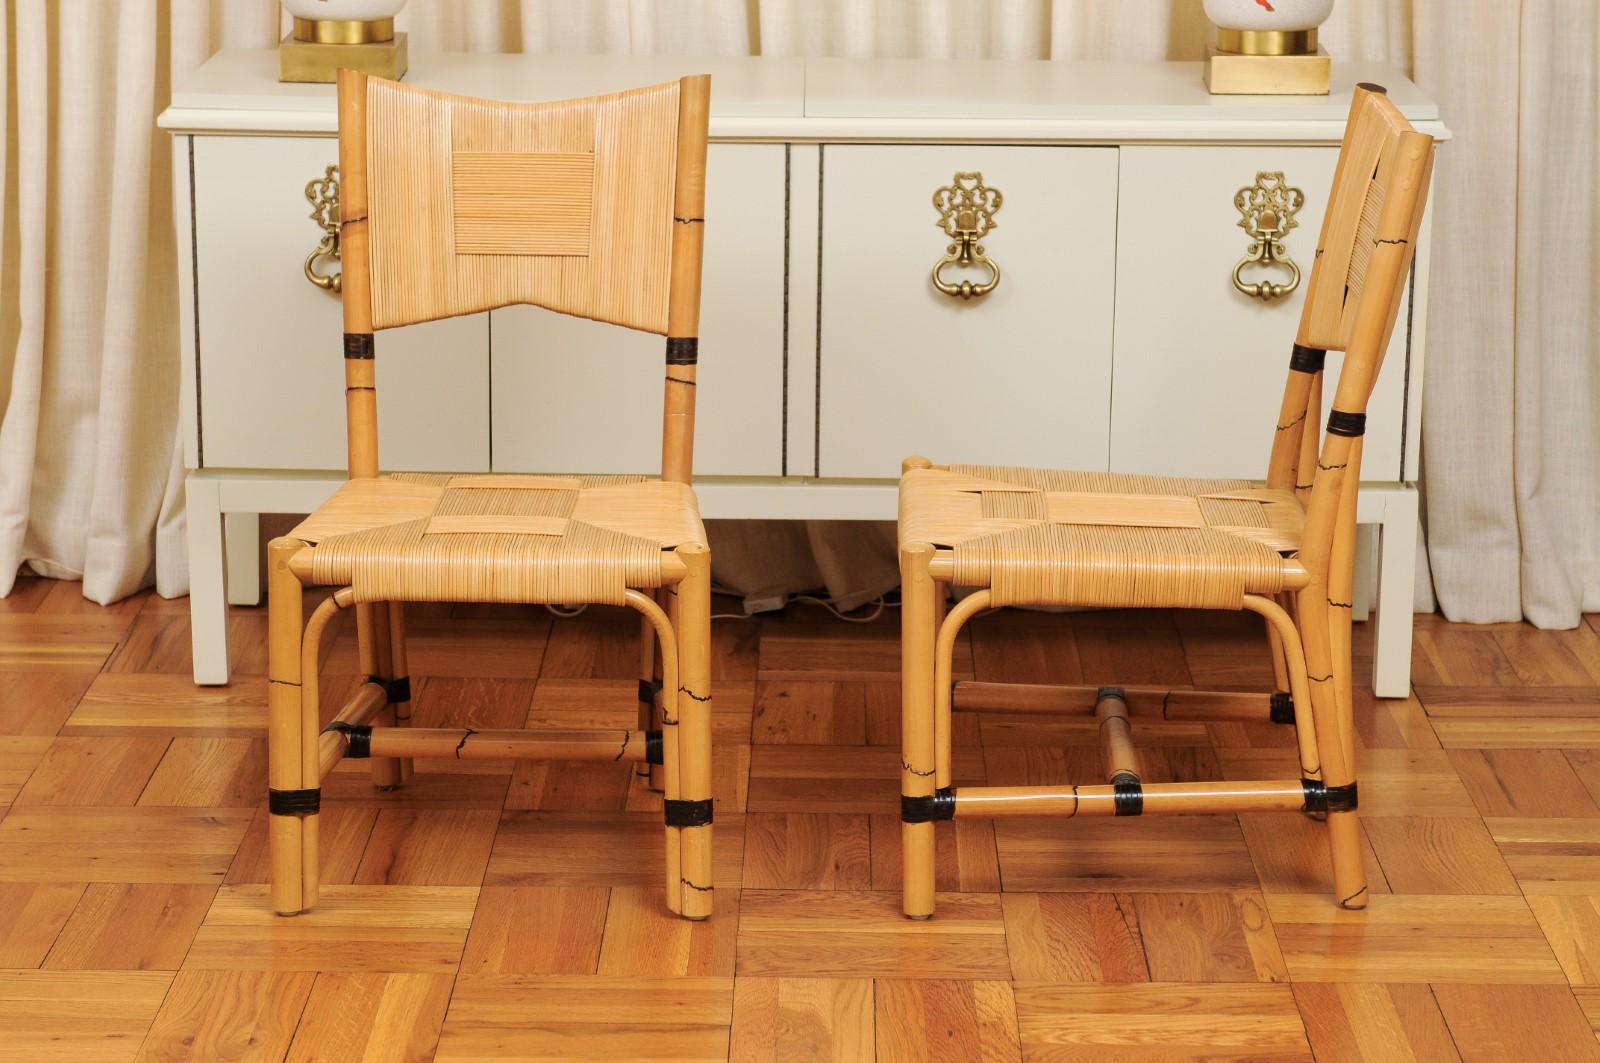 Superb Set of 8 Rush Rattan Dining Chairs by John Hutton for Donghia, circa 1995 For Sale 6